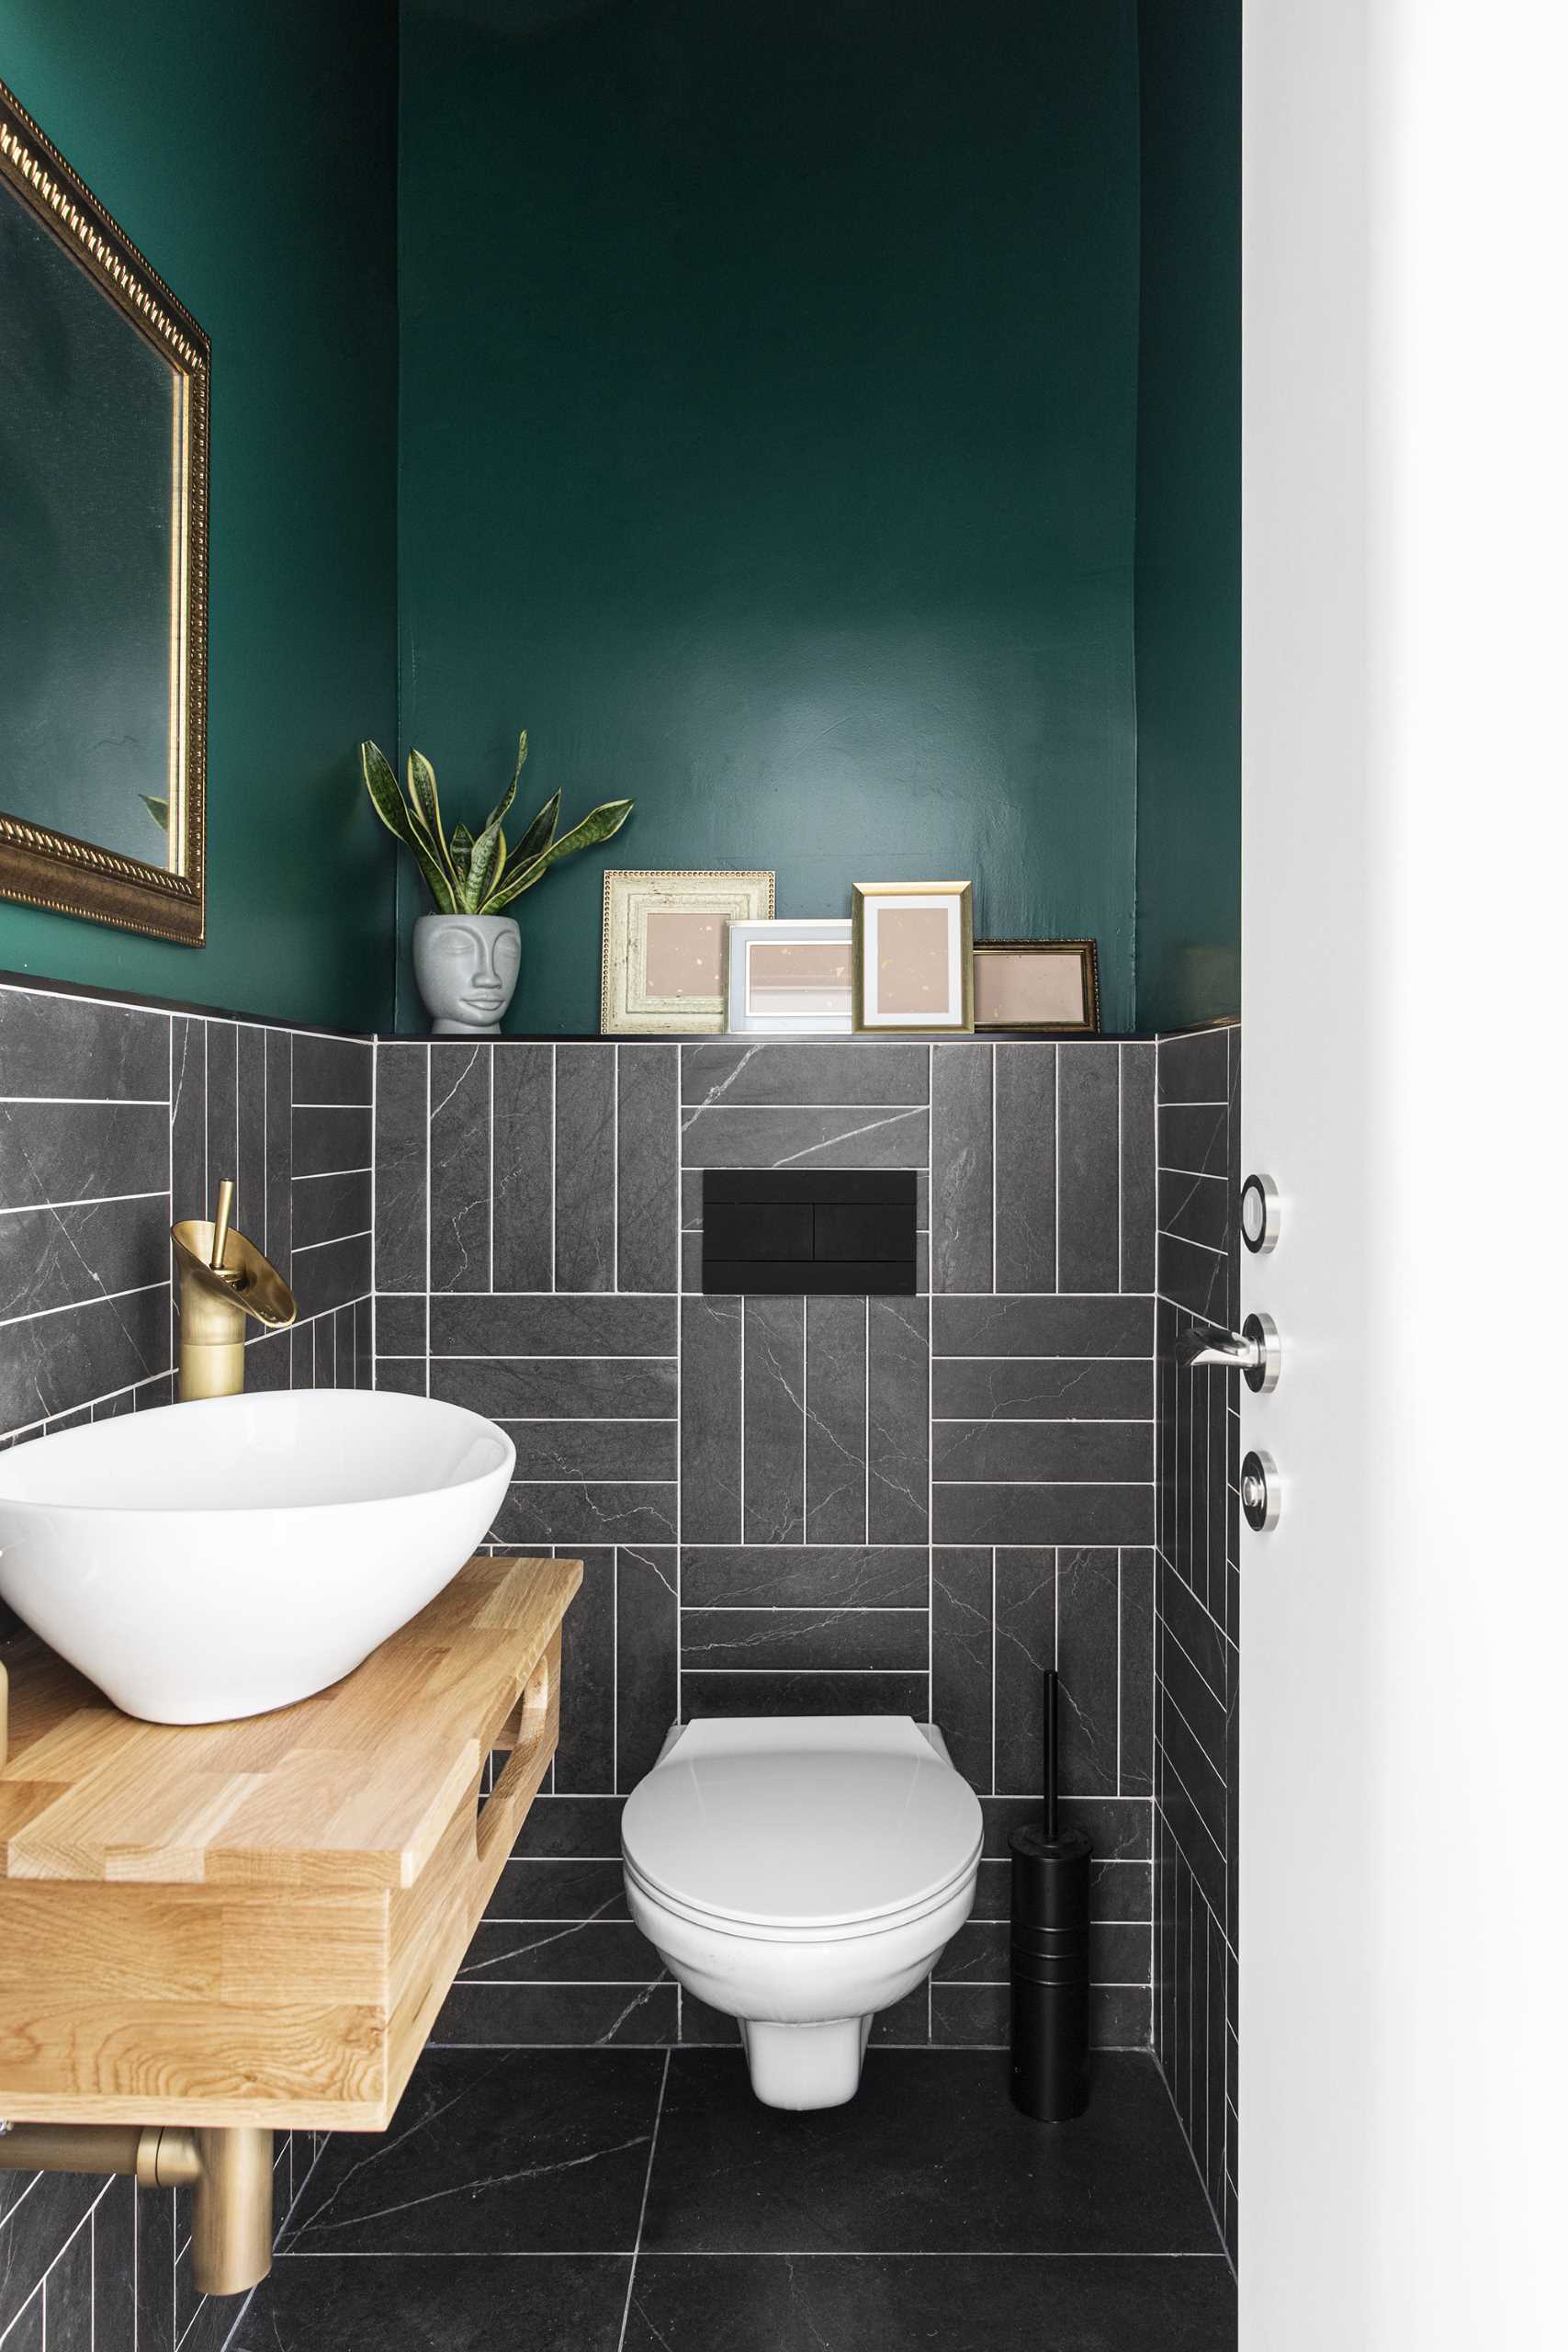 This modern powder room has bold green walls, dark grey tiles, and a gold frame mirror with matching decor items.